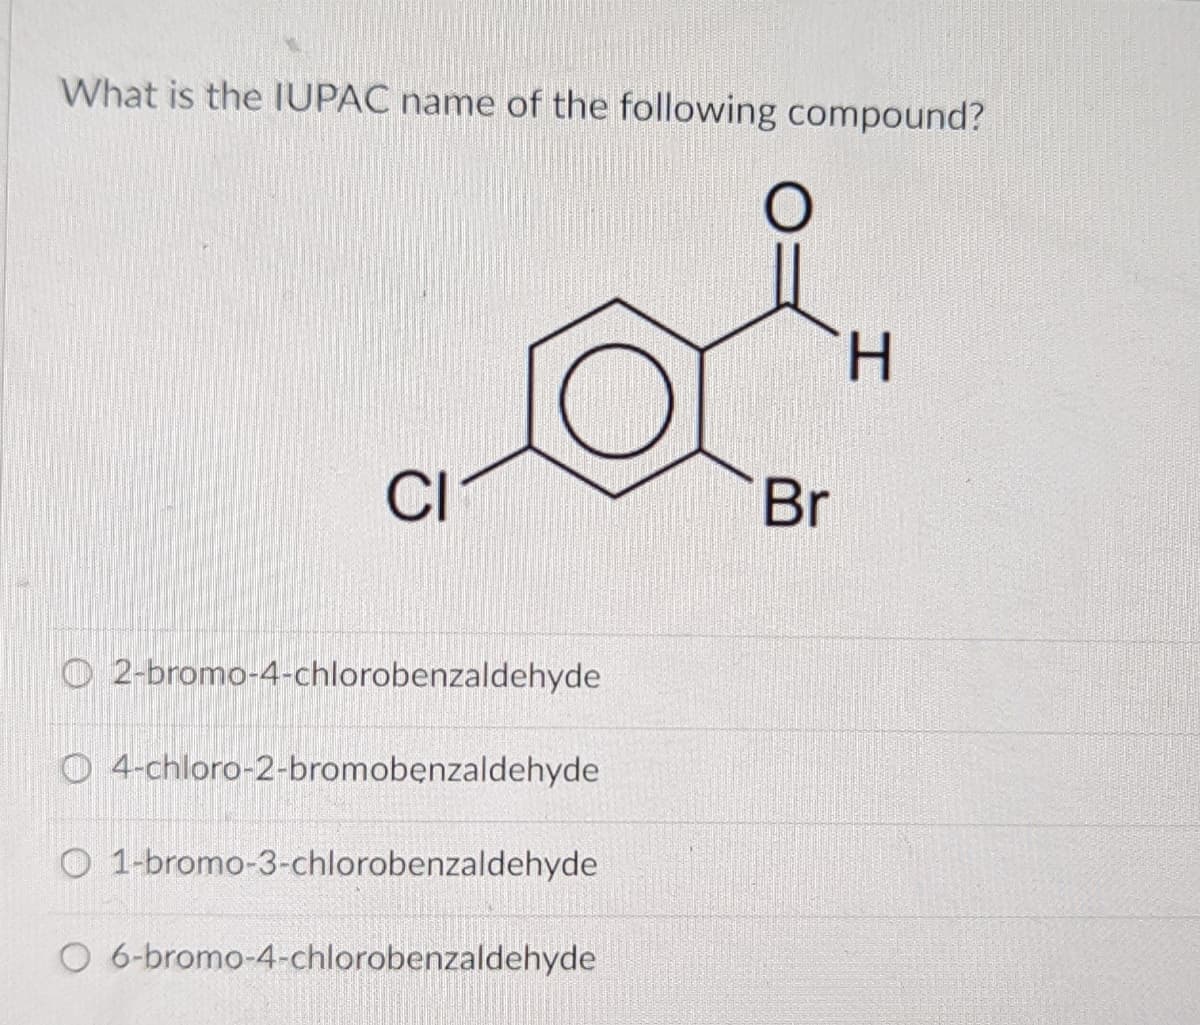 What is the IUPAC name of the following compound?
H.
CI
Br
O 2-bromo-4-chlorobenzaldehyde
O 4-chloro-2-bromobenzaldehyde
O 1-bromo-3-chlorobenzaldehyde
O 6-bromo-4-chlorobenzaldehyde
